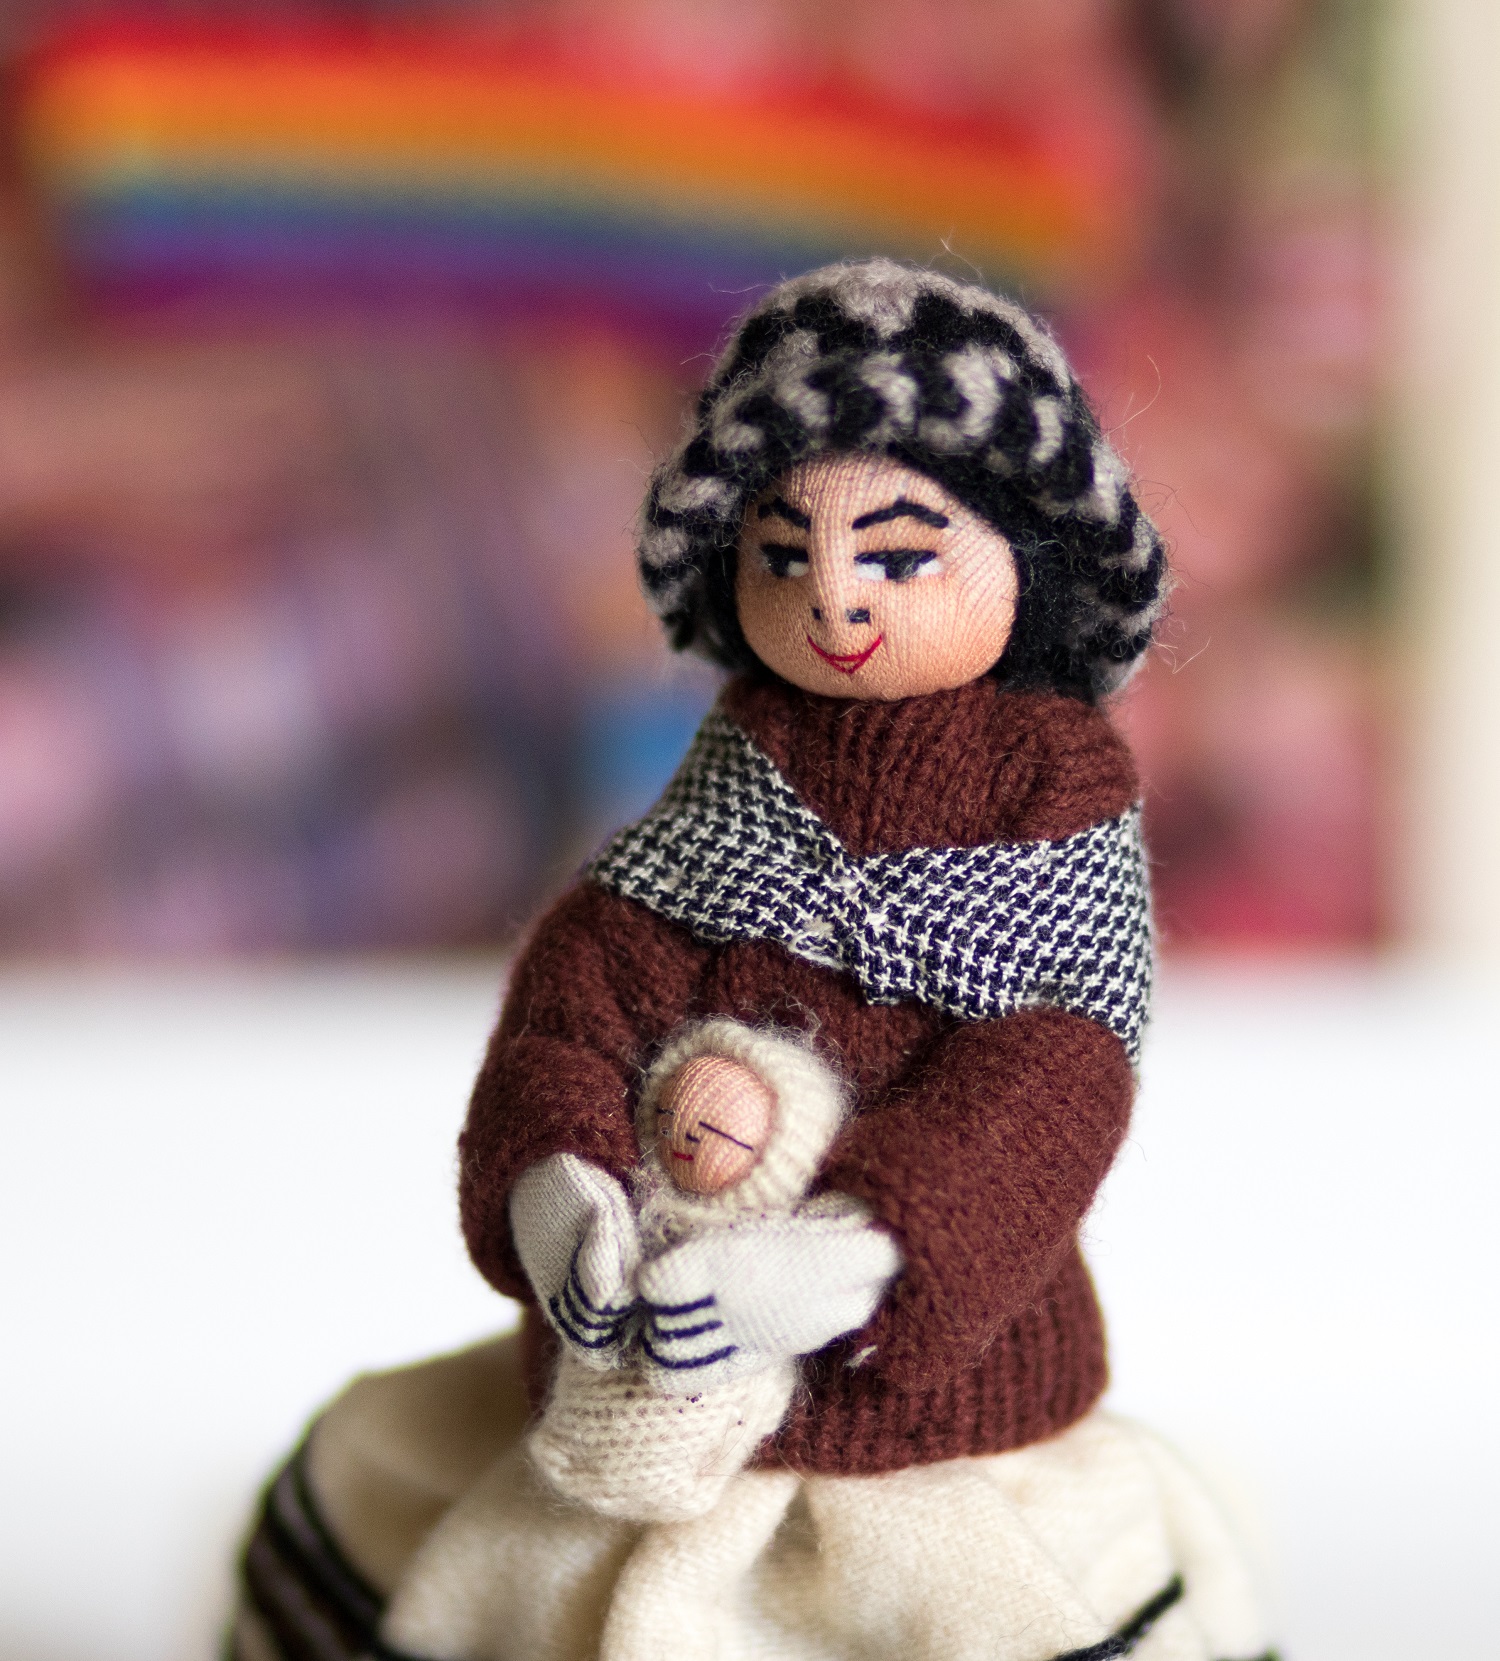 Details about   NATIVE ANDEAN BABY GIRL DOLL TRADITIONALLY DRESSED W/MANTA NIB COLORFUL SOFT 